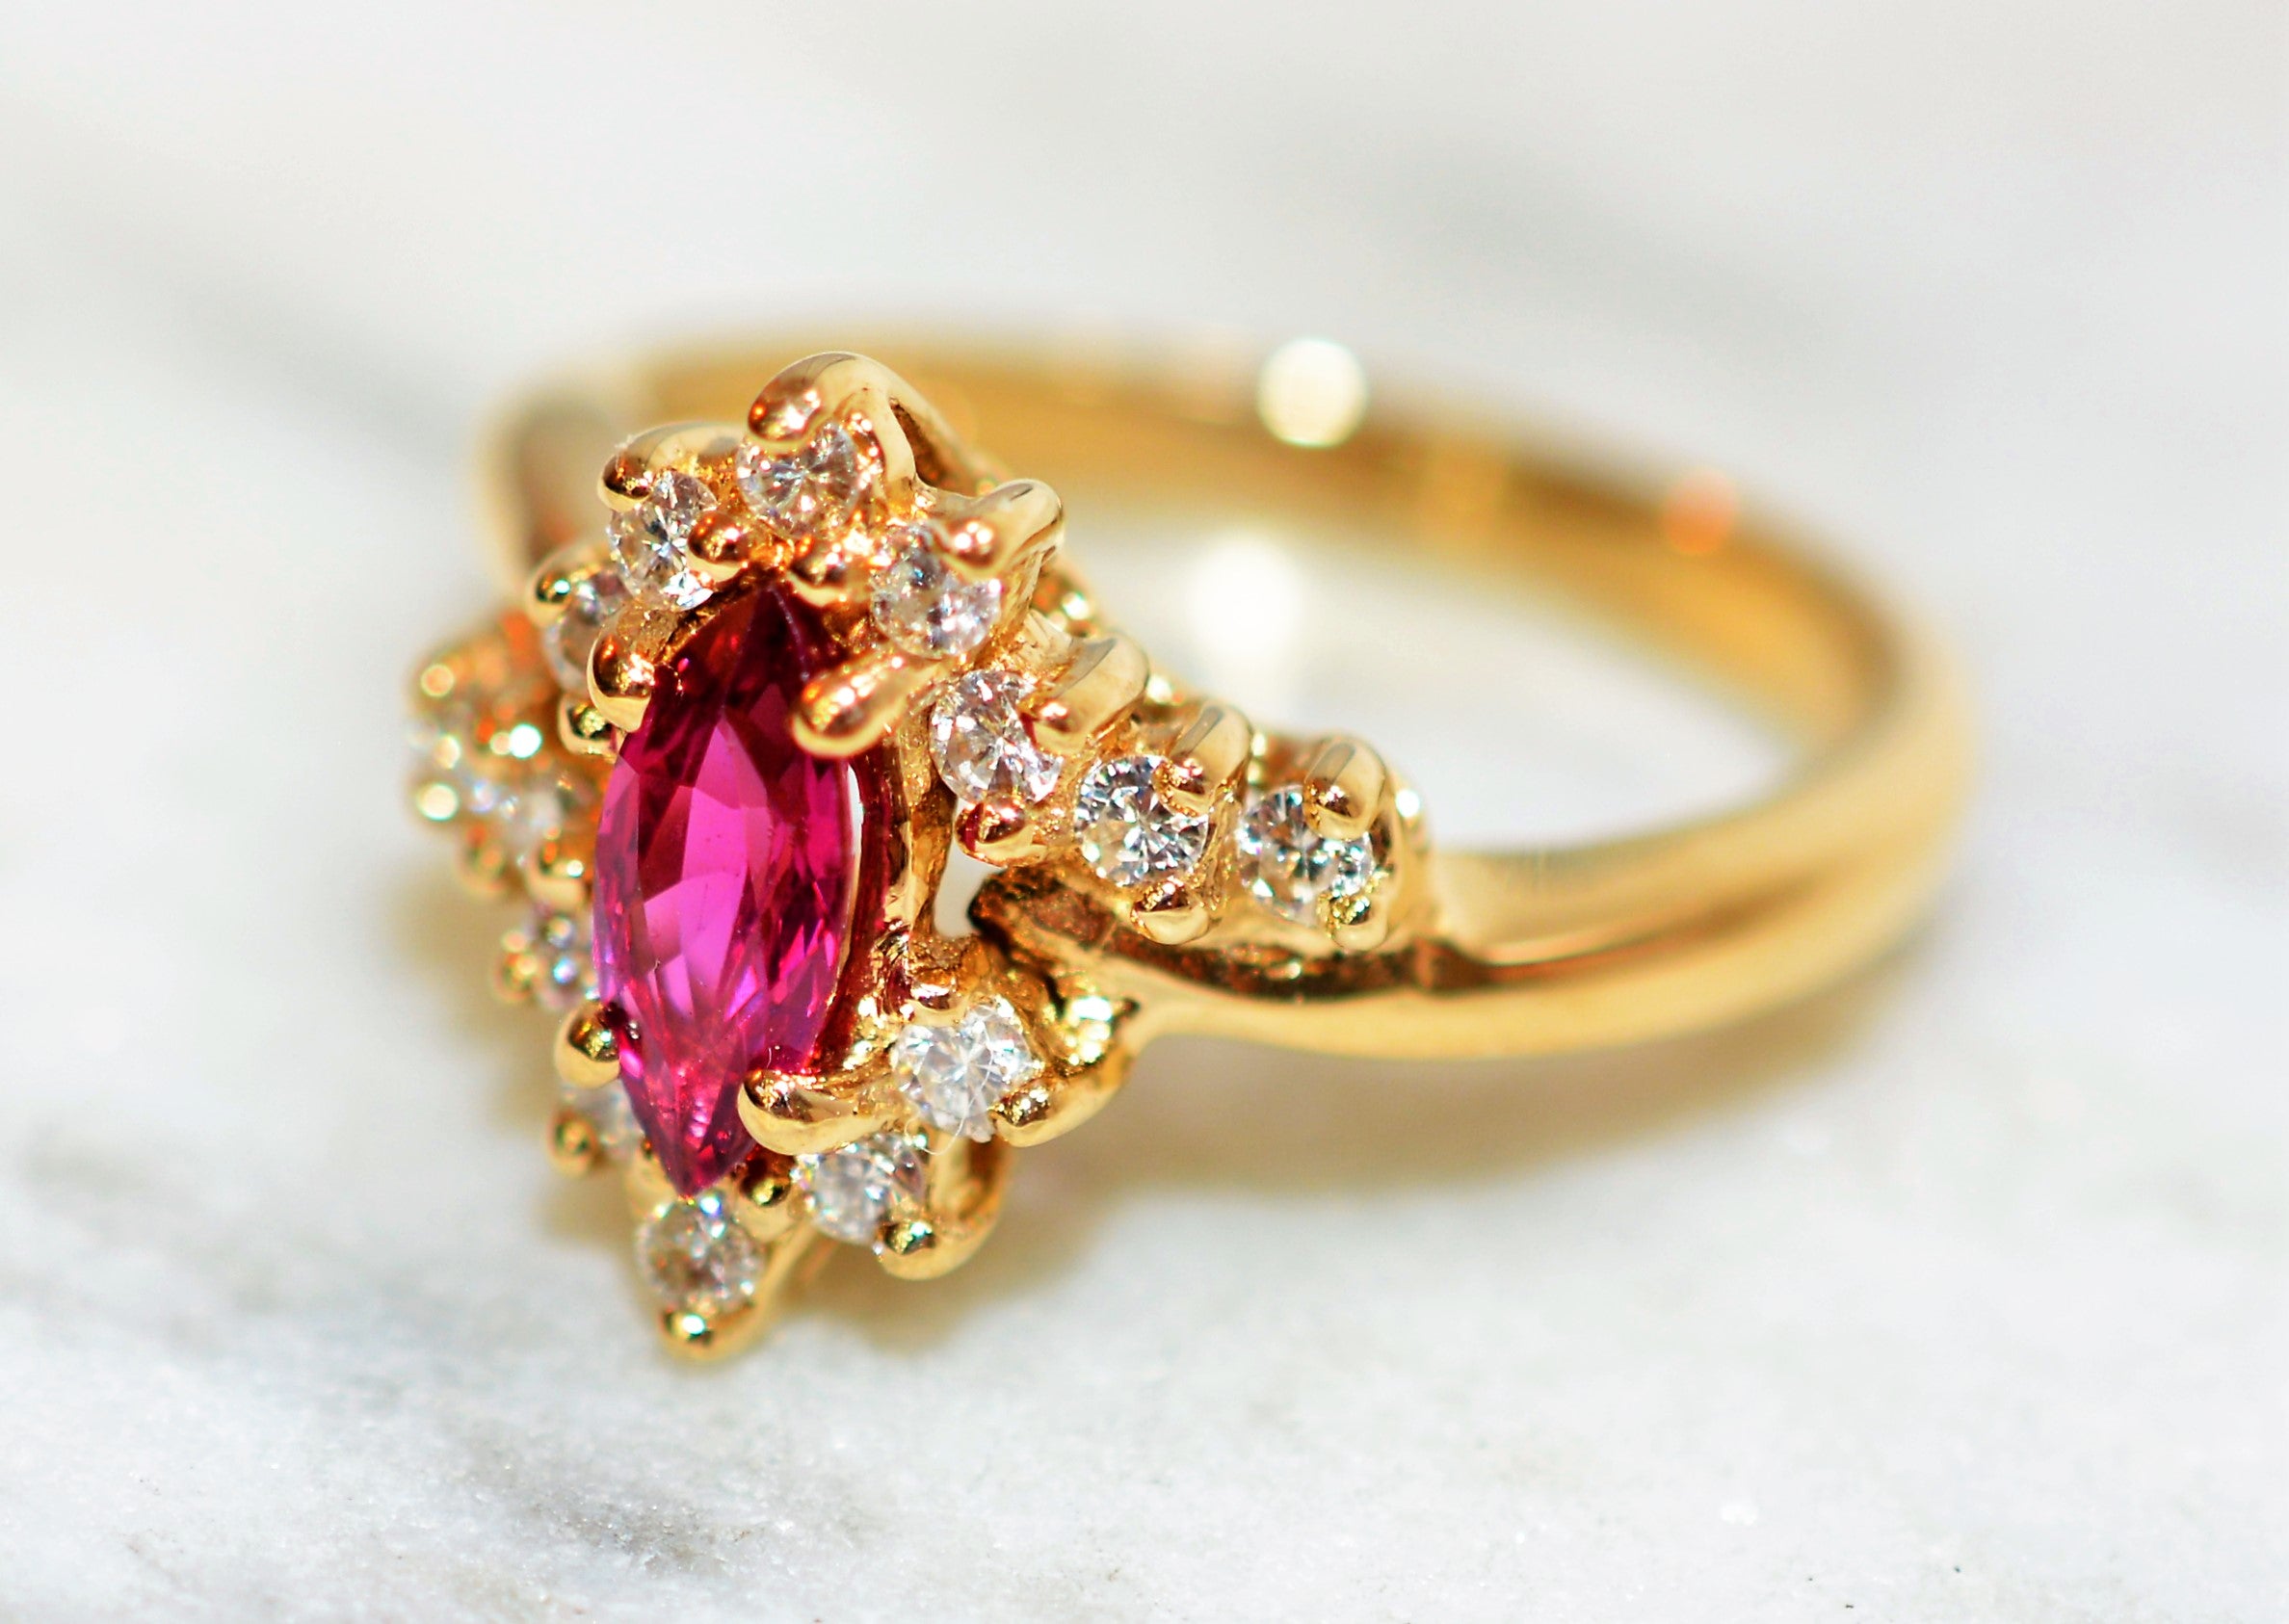 Natural Ruby & Diamond Ring 14K Solid Gold .80tcw Ruby Ring Gemstone Ring Birthstone Ring Engagement Ring Cocktail Statement Ring Estate